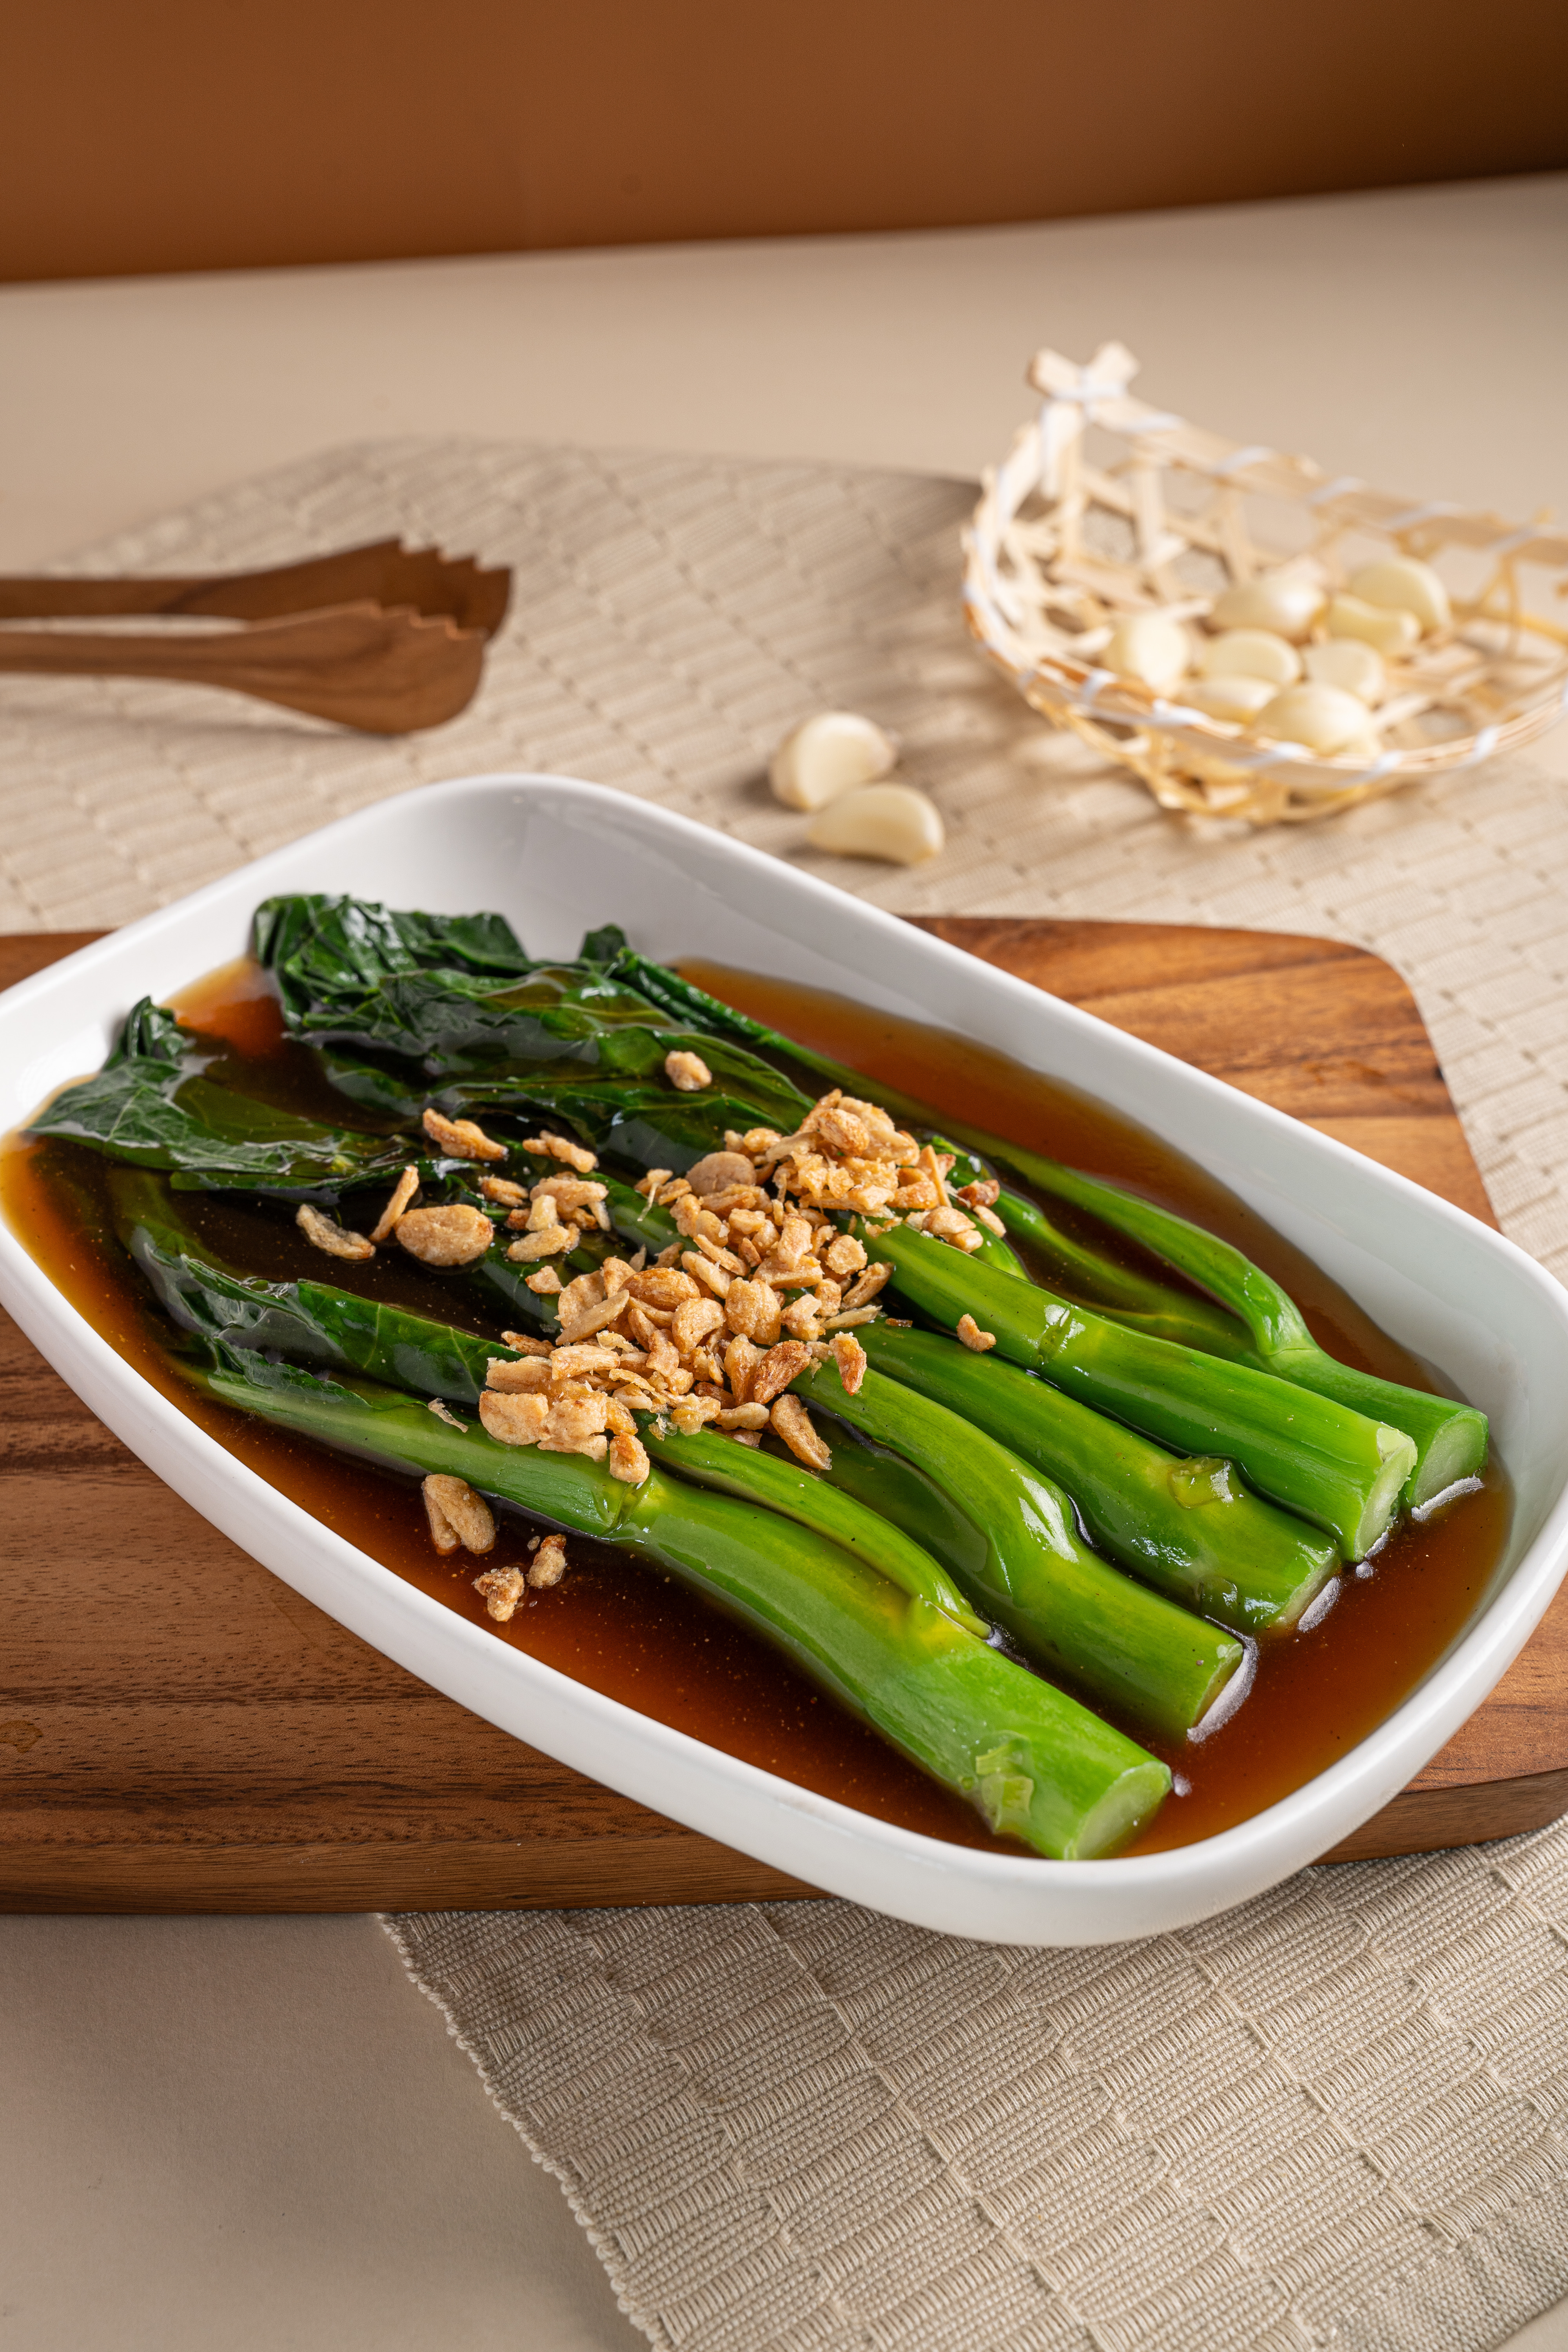 CHINESE KALE WITH OYSTER SAUCE